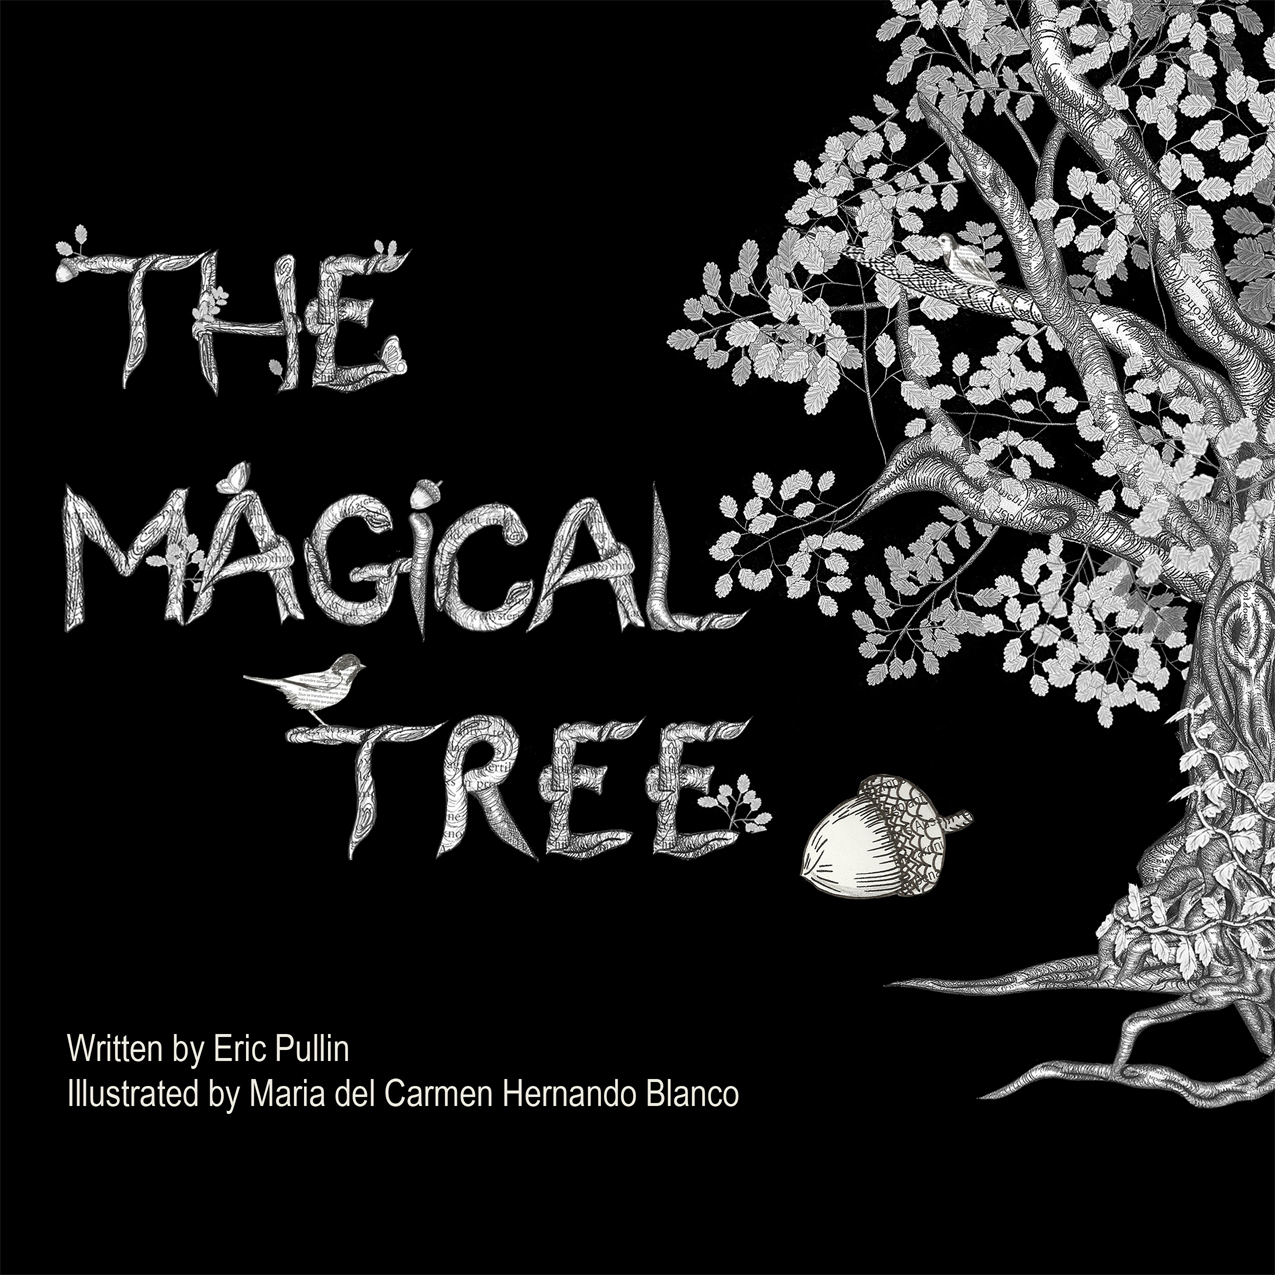 The Magical Tree